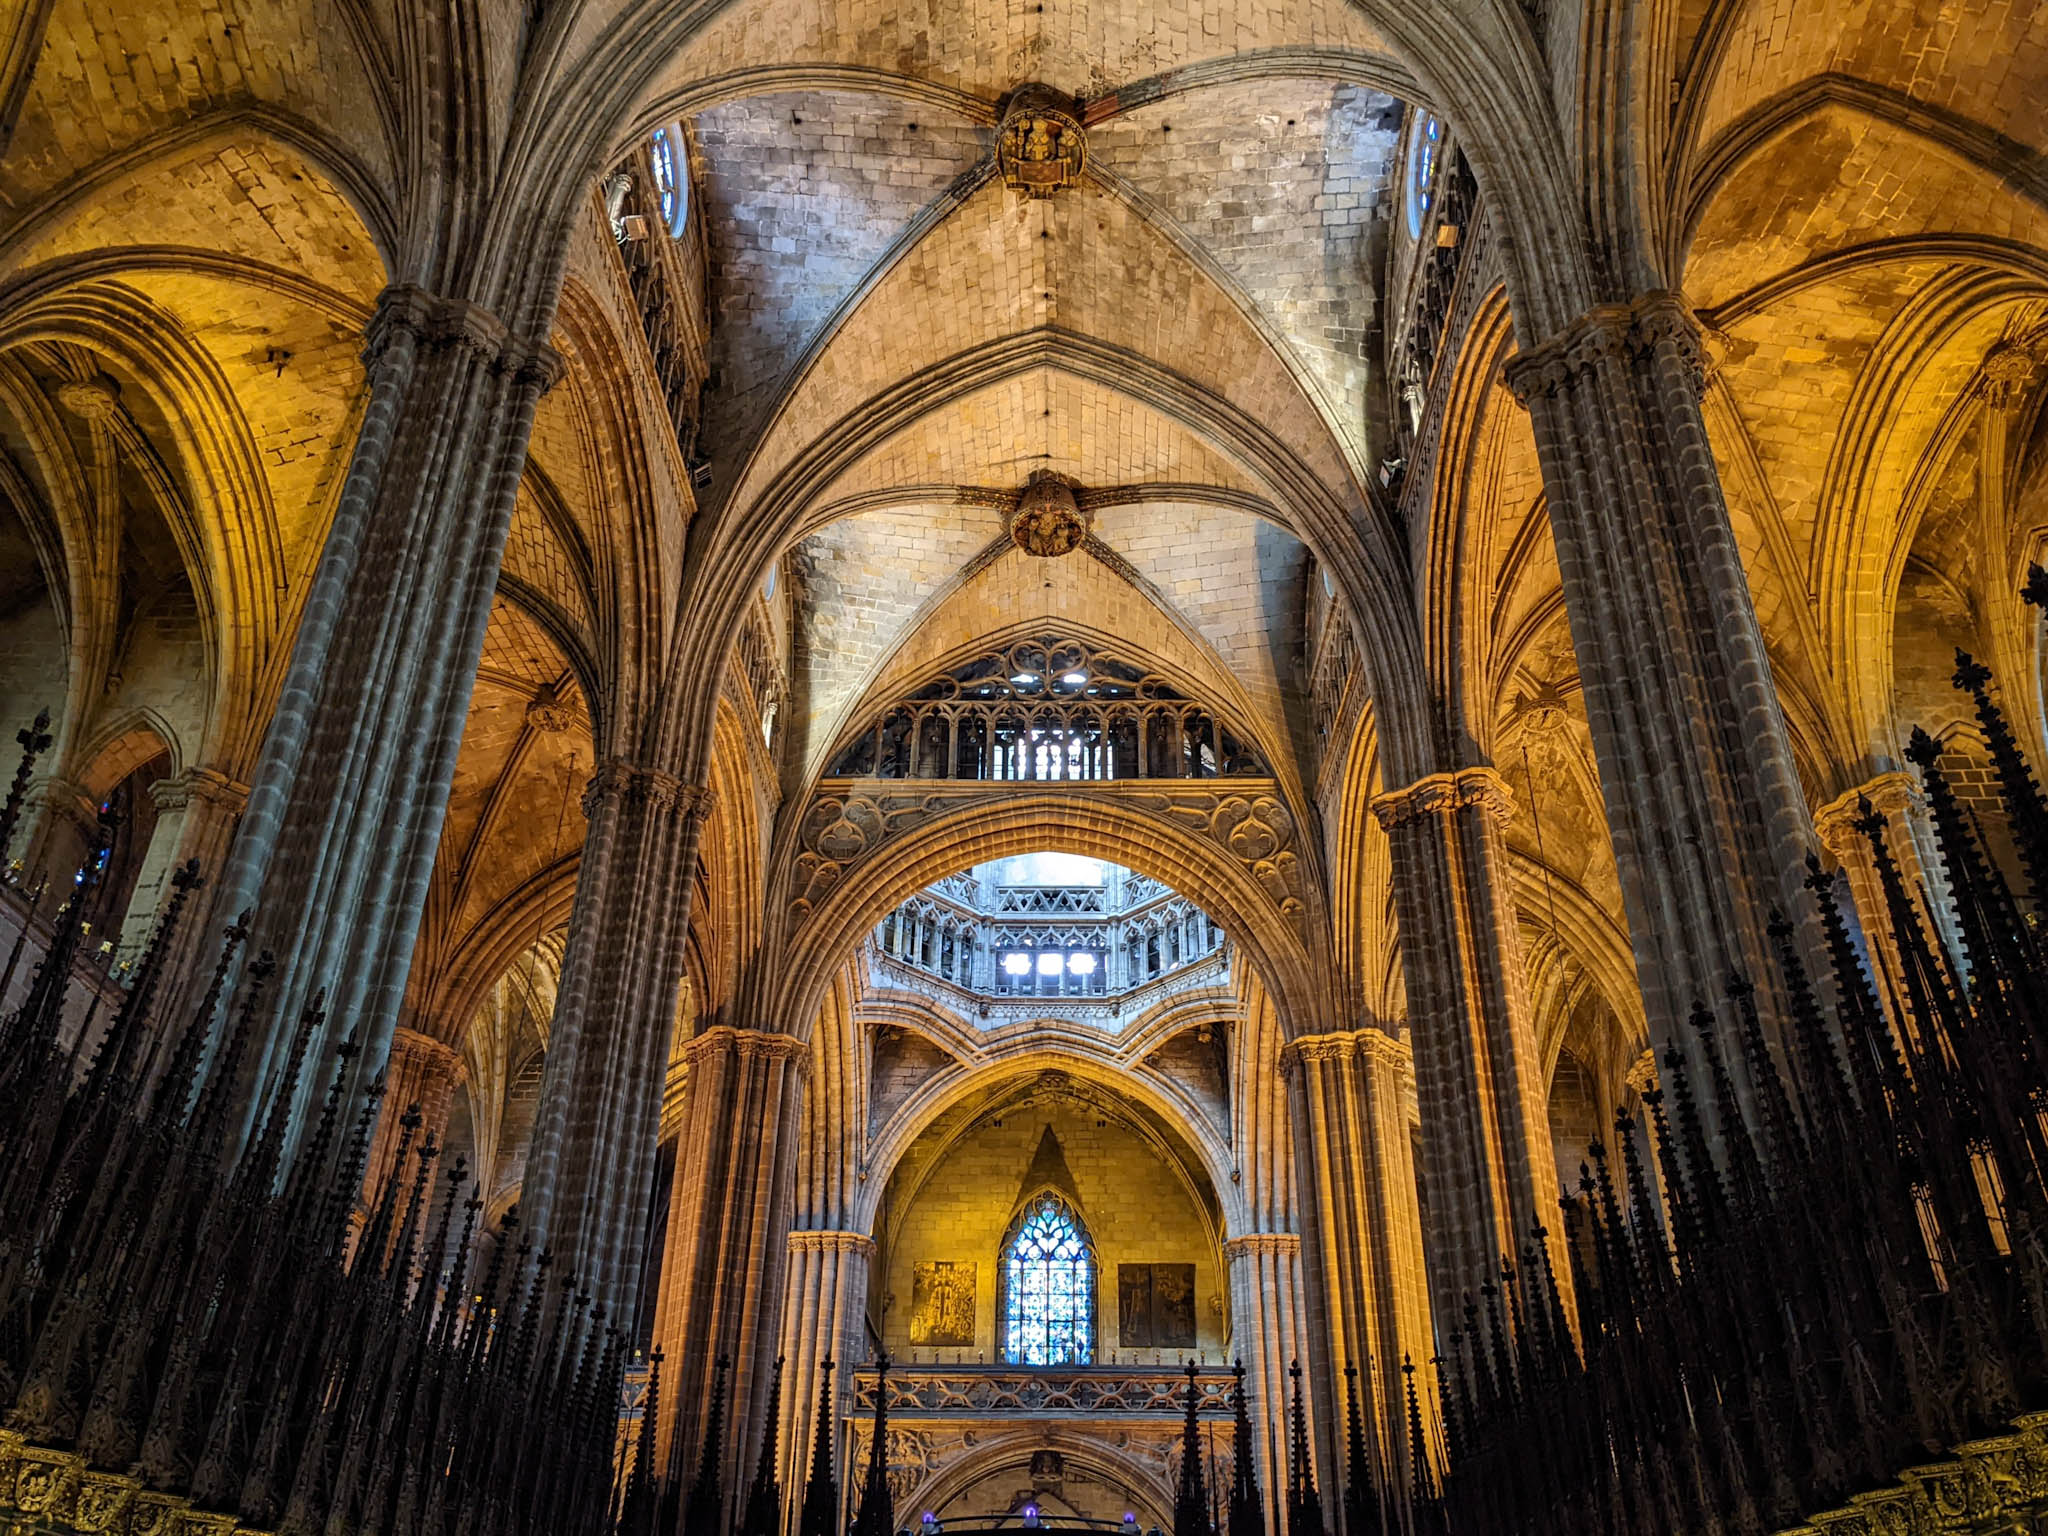 Inside the magnificent Cathedral of Barcelona.